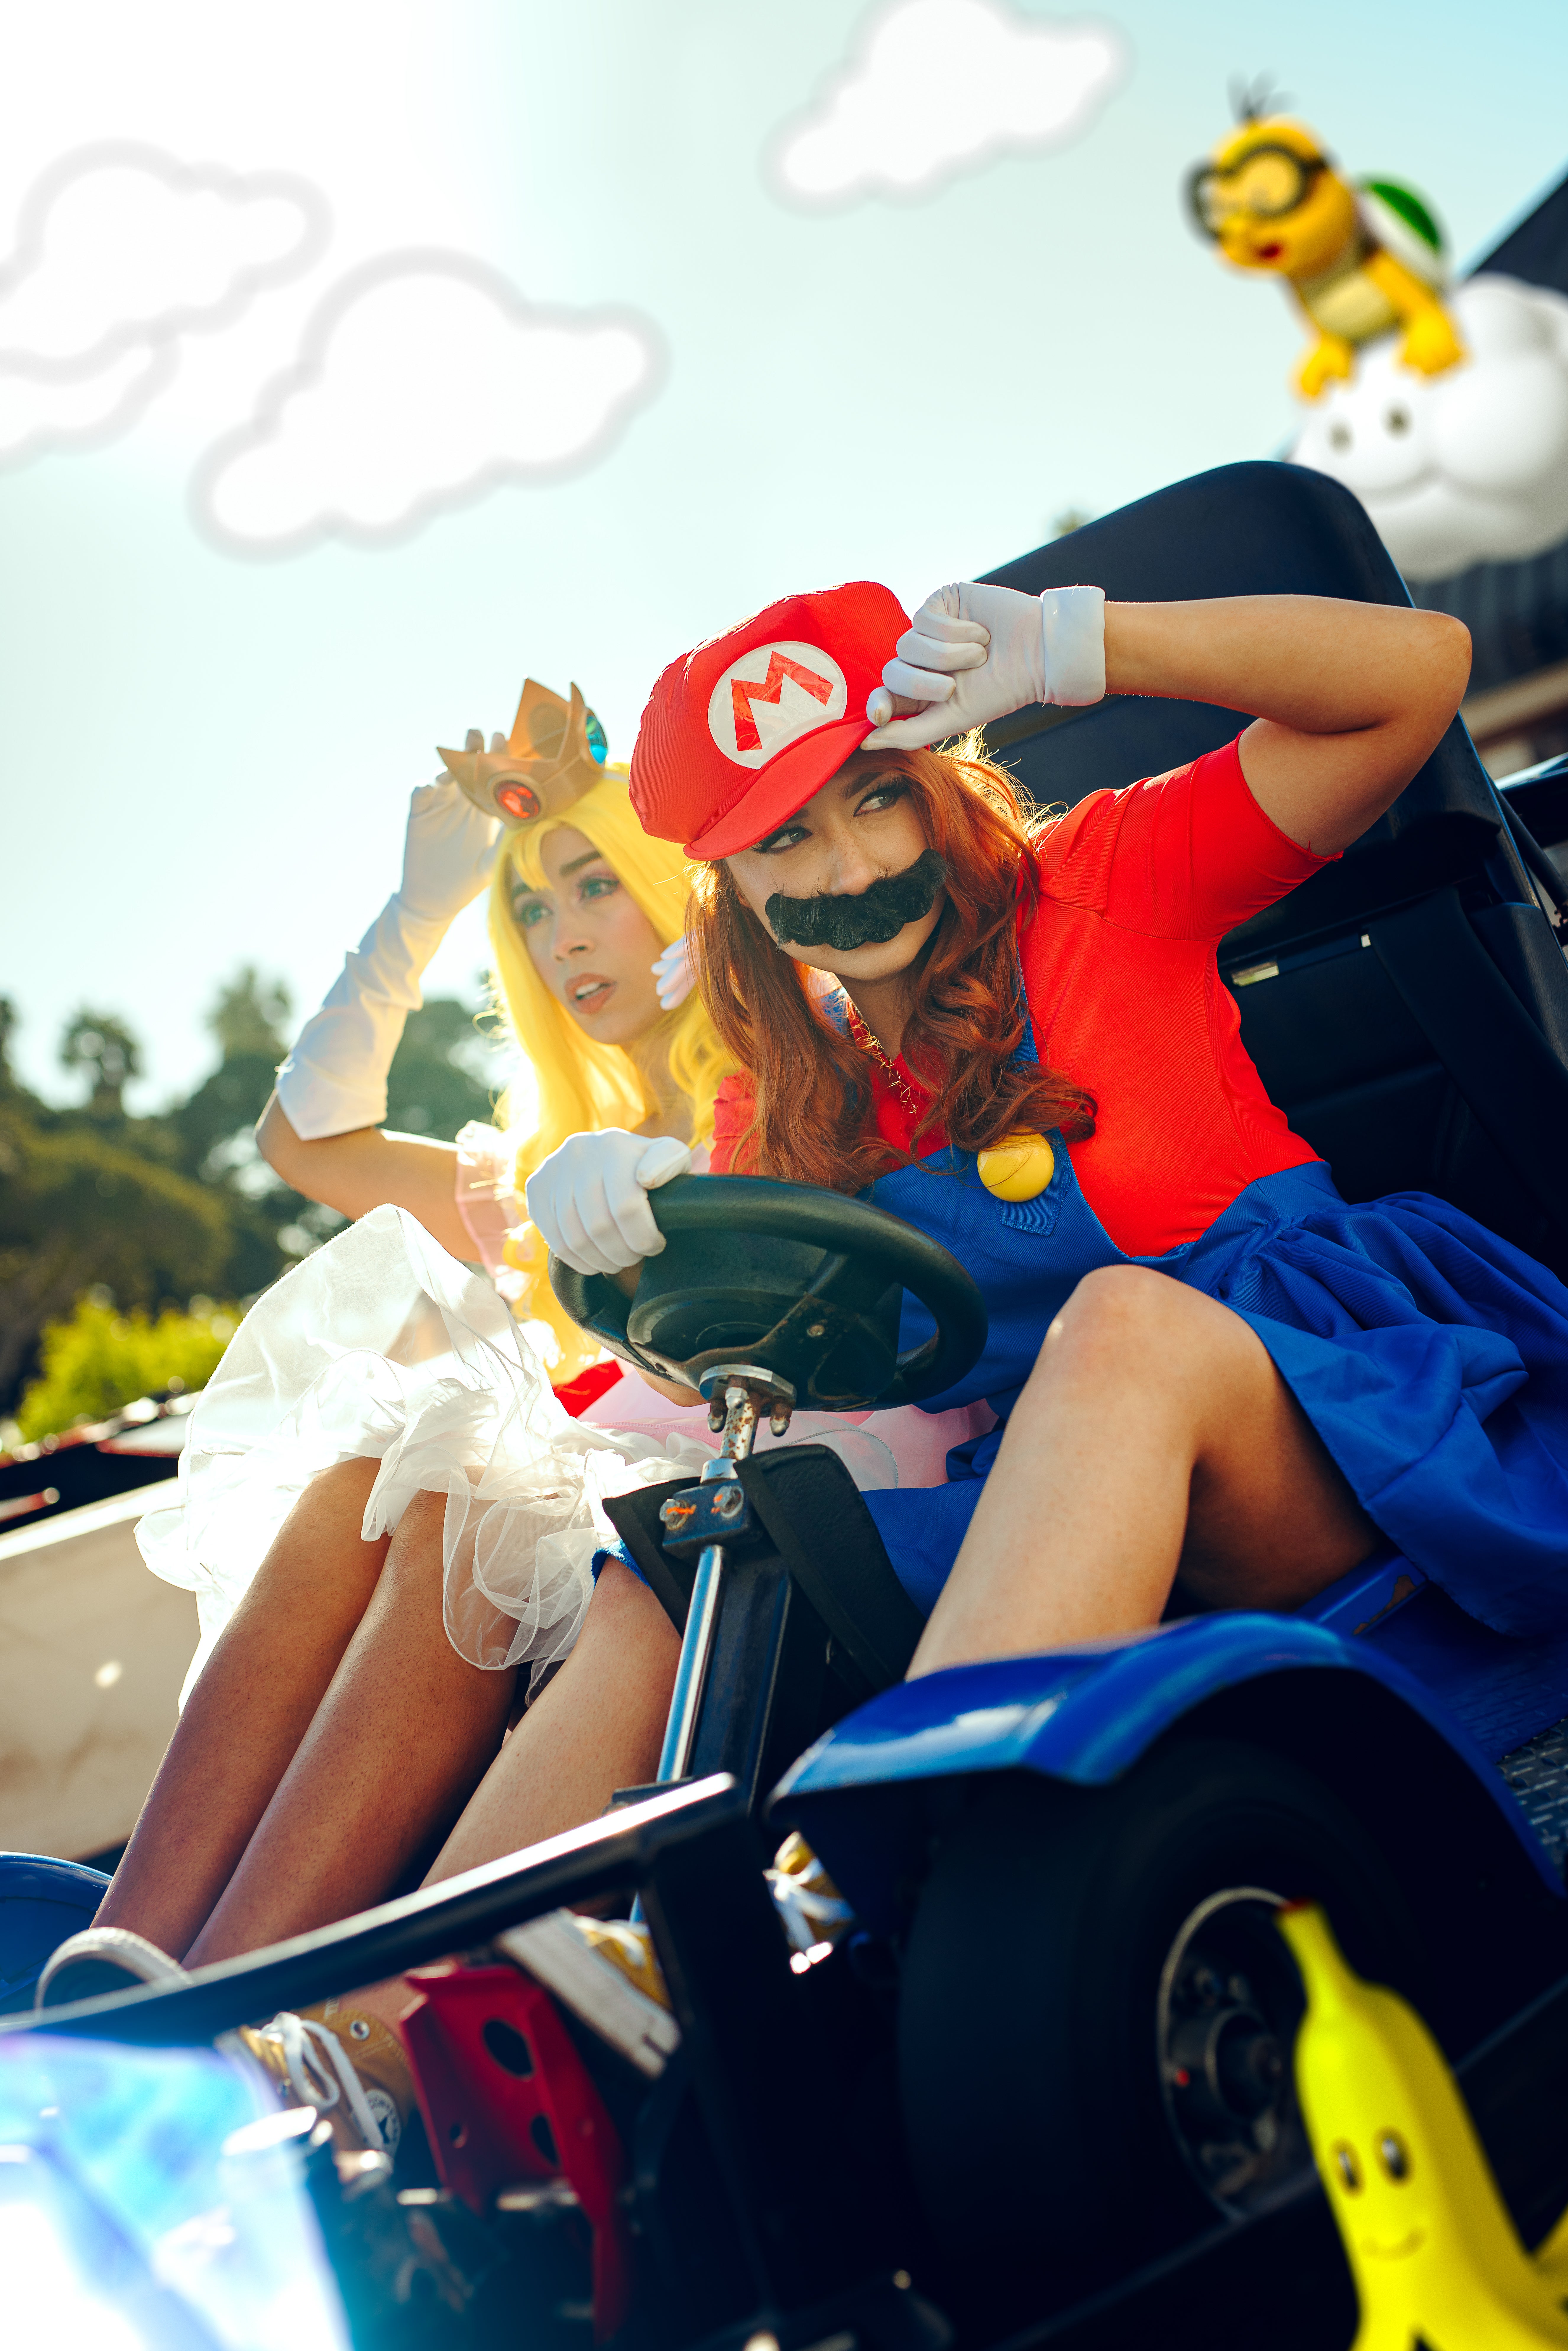 Mario Kart In Real Life (Images Courtesy Caitlin Christine. See Caption For Photographers/Cosplayers)